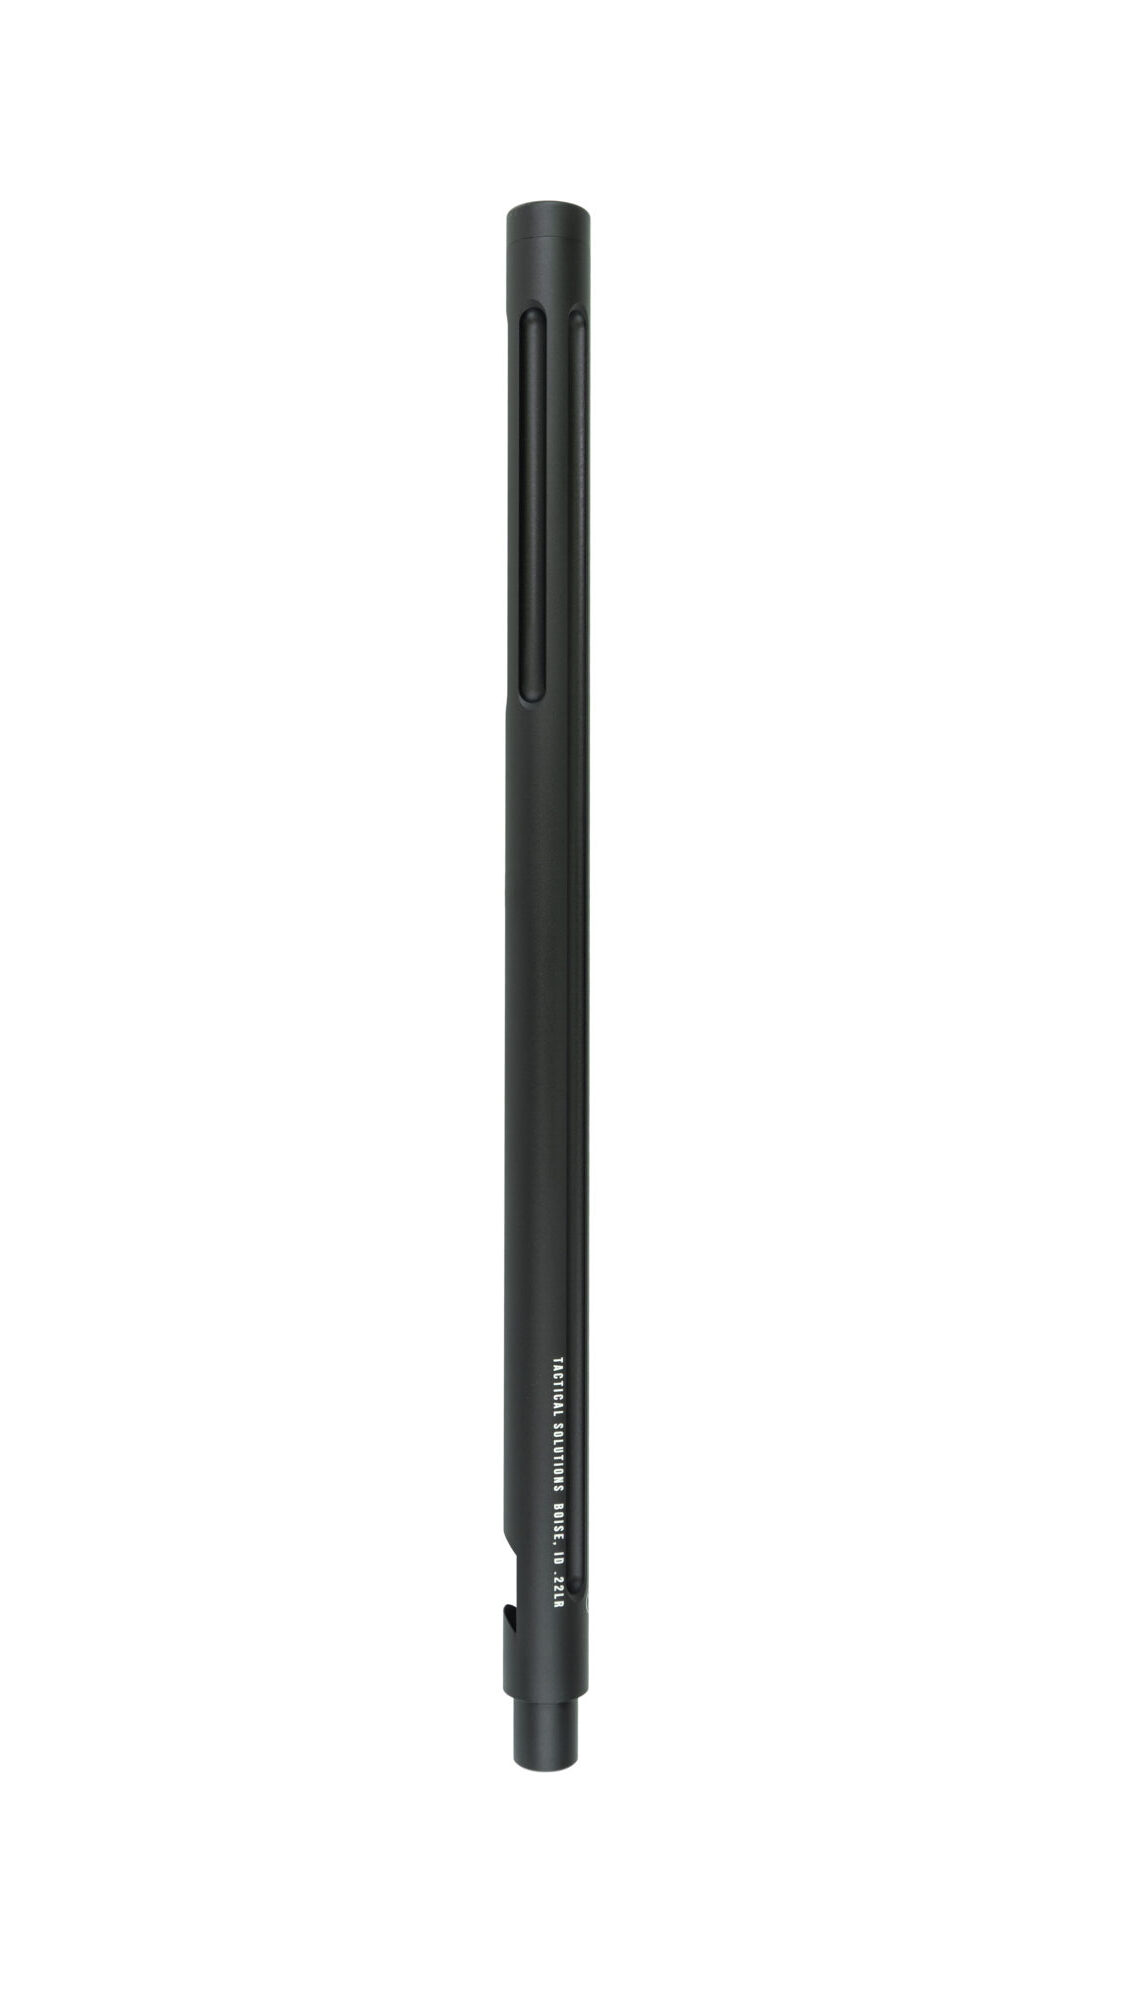 Vertical image of the MATTE BLACK X-RING BARREL FOR RUGER® 10/22® RIFLES THREADED AND FLUTED